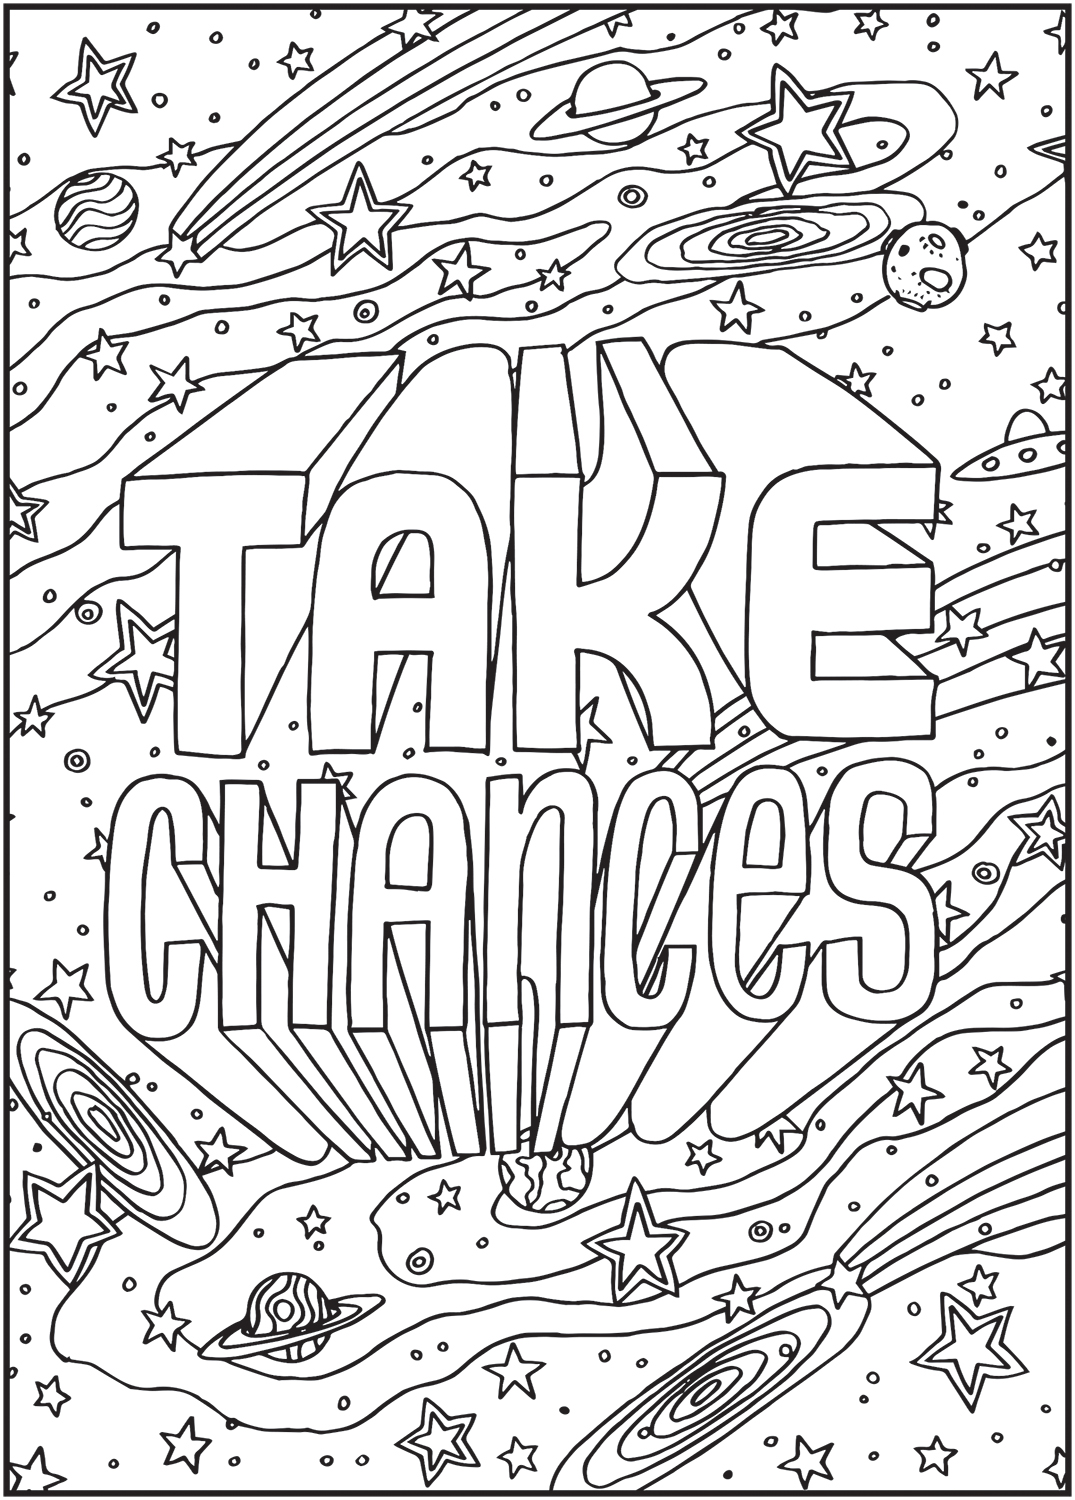 Cra-Z-Art Timeless Creations Adult Coloring Book, Words to Color